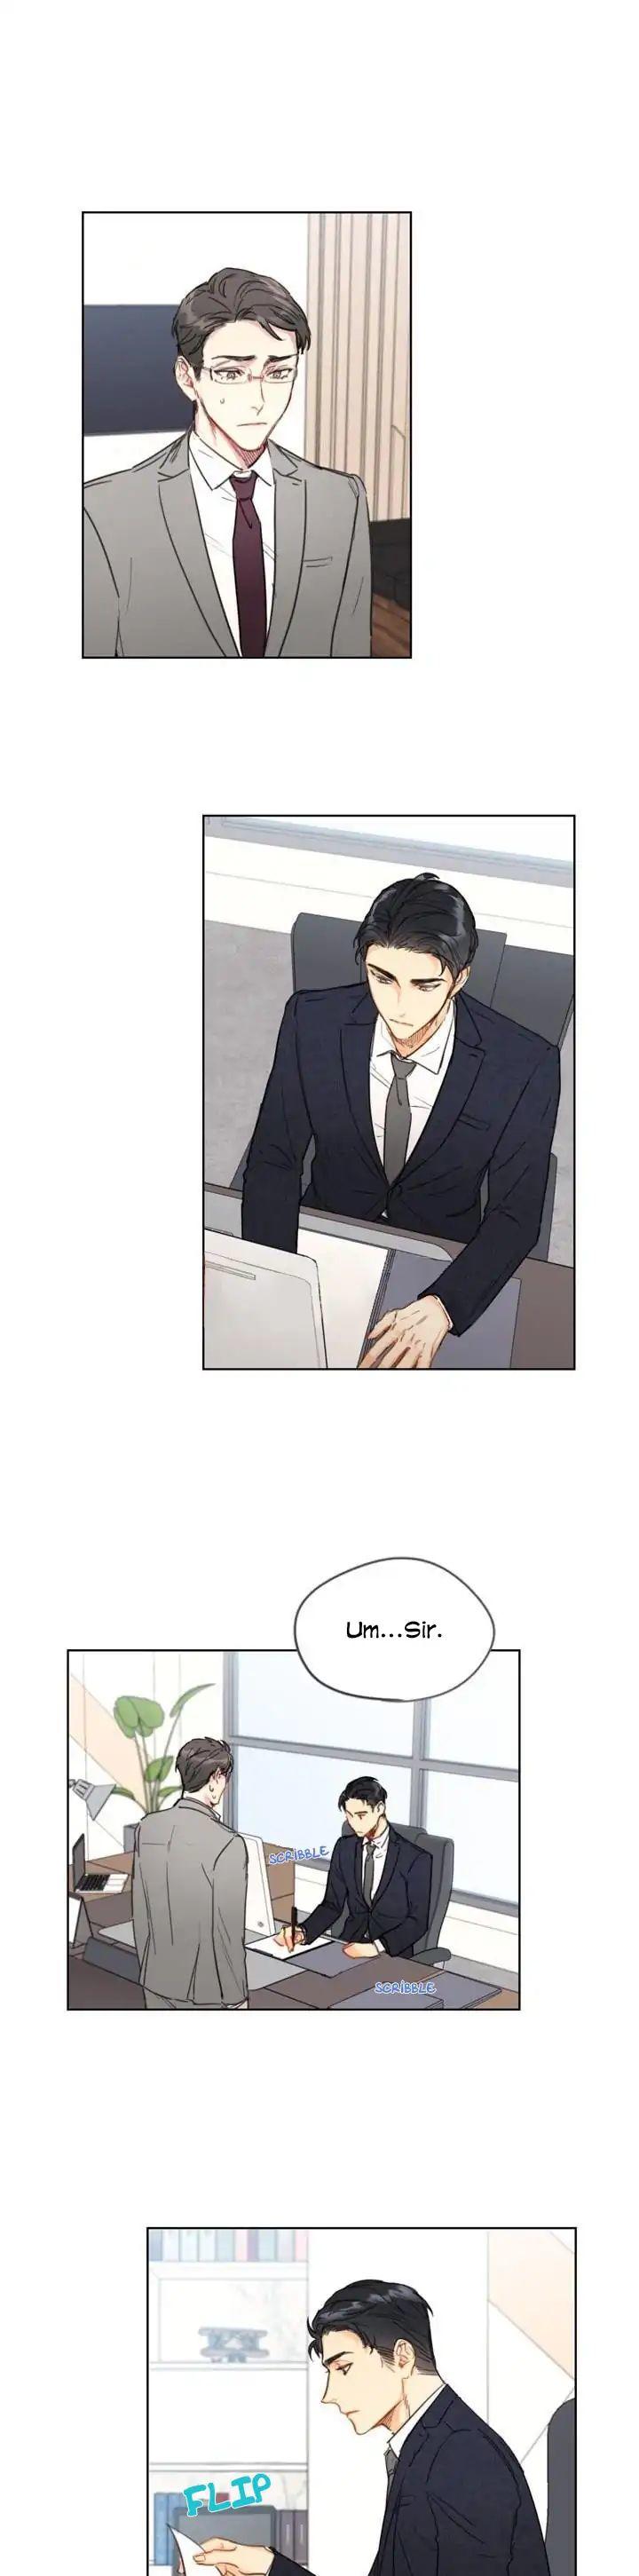 Date blind manhwa office the The Office